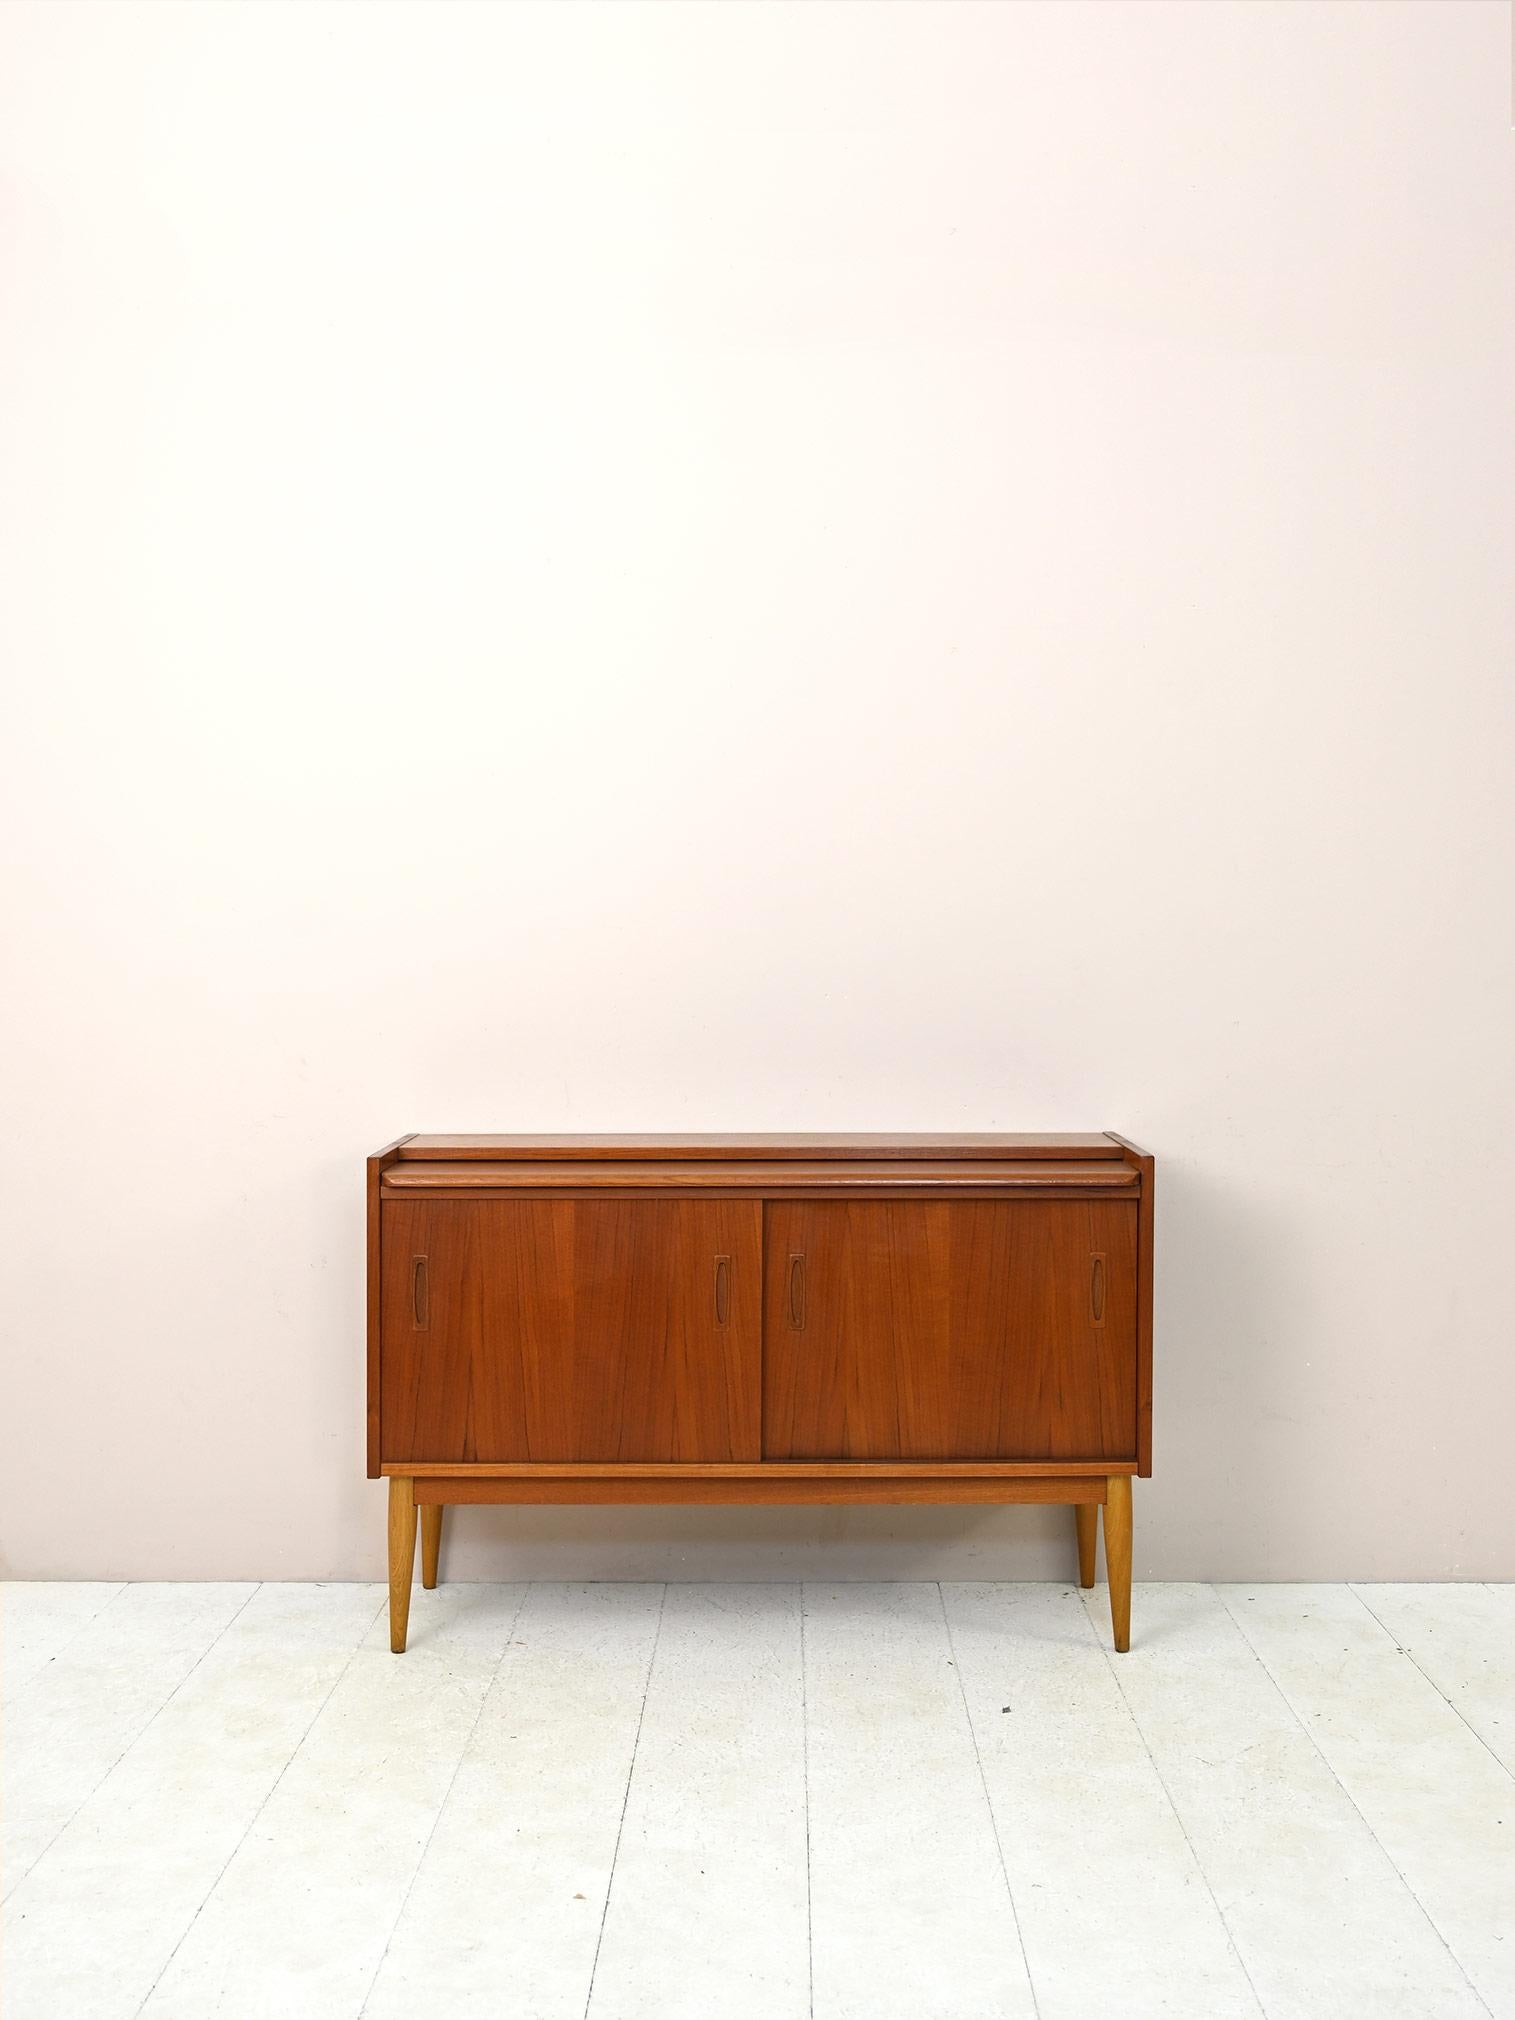 Scandinavian sideboard from the 1960s with drawers and hinged doors.

Particular highboard of Nordic manufacture made of teak wood. Consists of a large storage compartment and 7 drawers of different sizes. The last drawer shares a handle with a